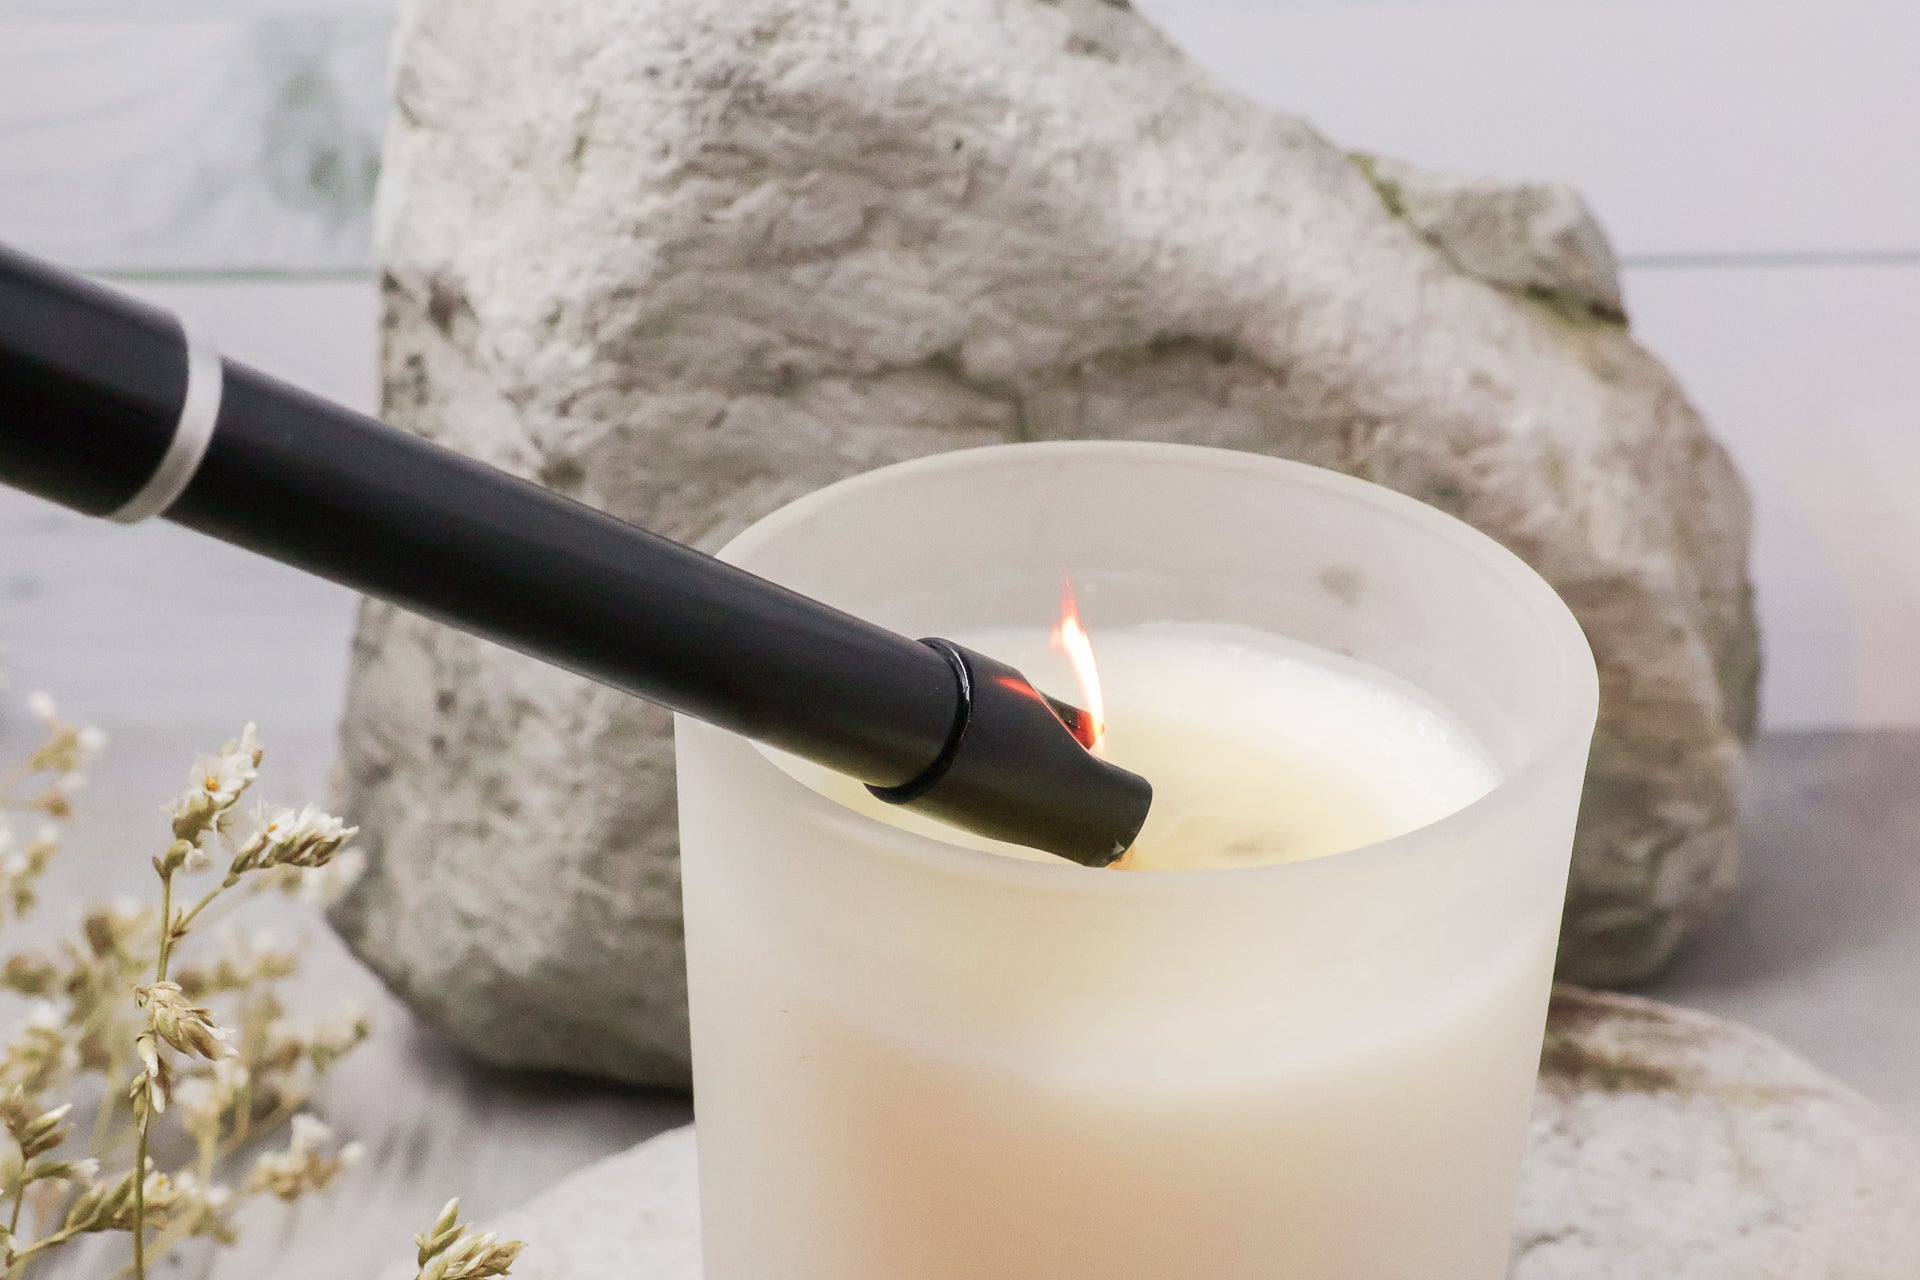 Lighter with a flame lighting a Crystl. Candle